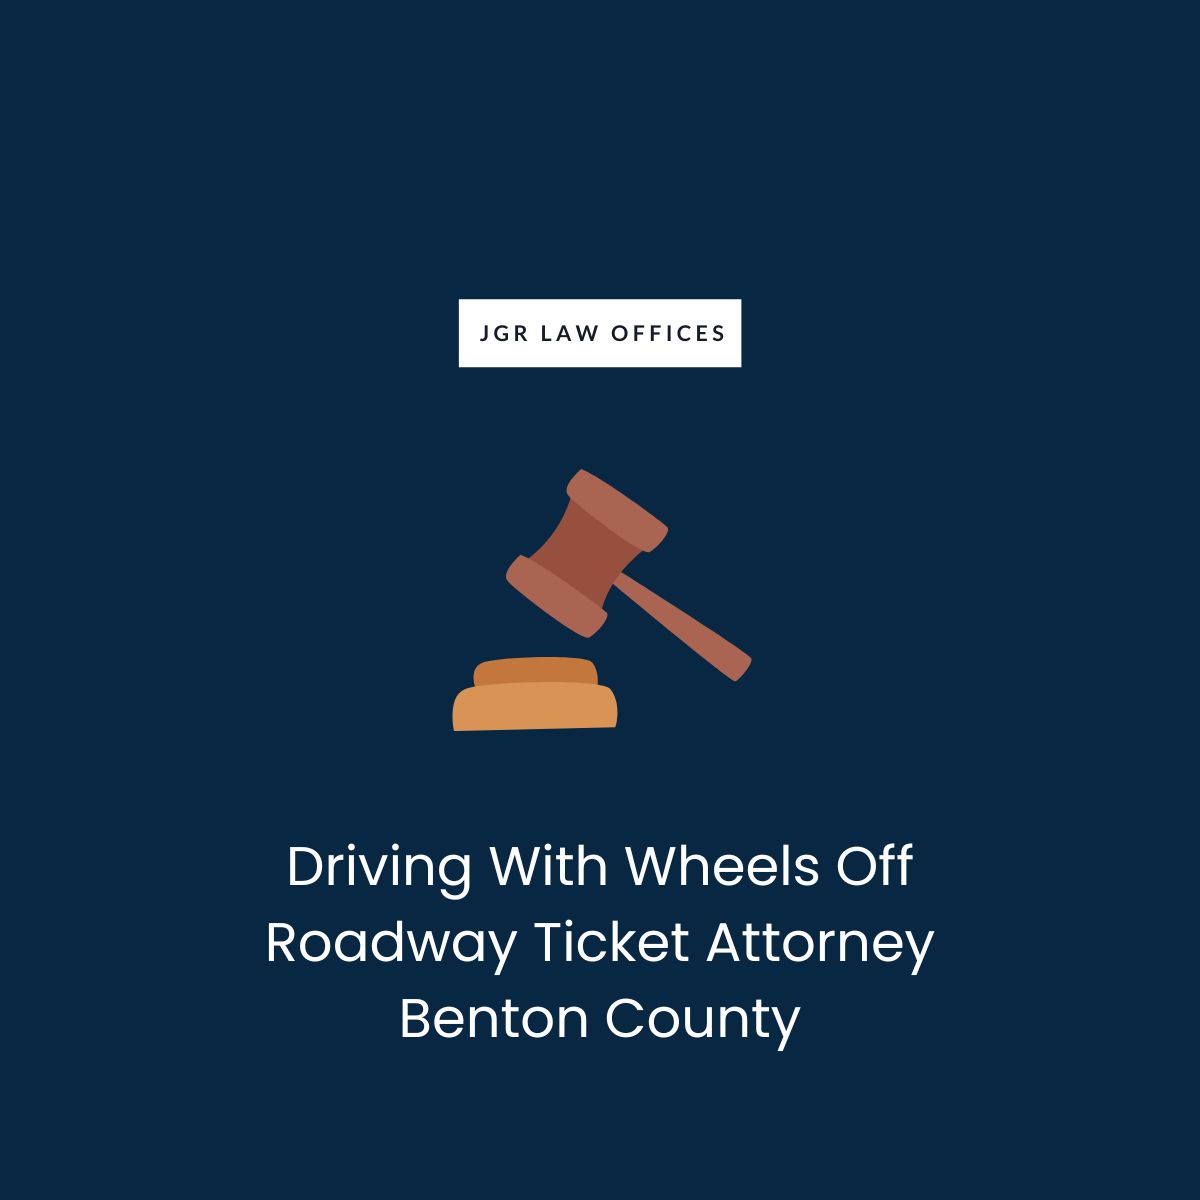 Driving With Wheels Off Roadway Ticket Attorney Benton County